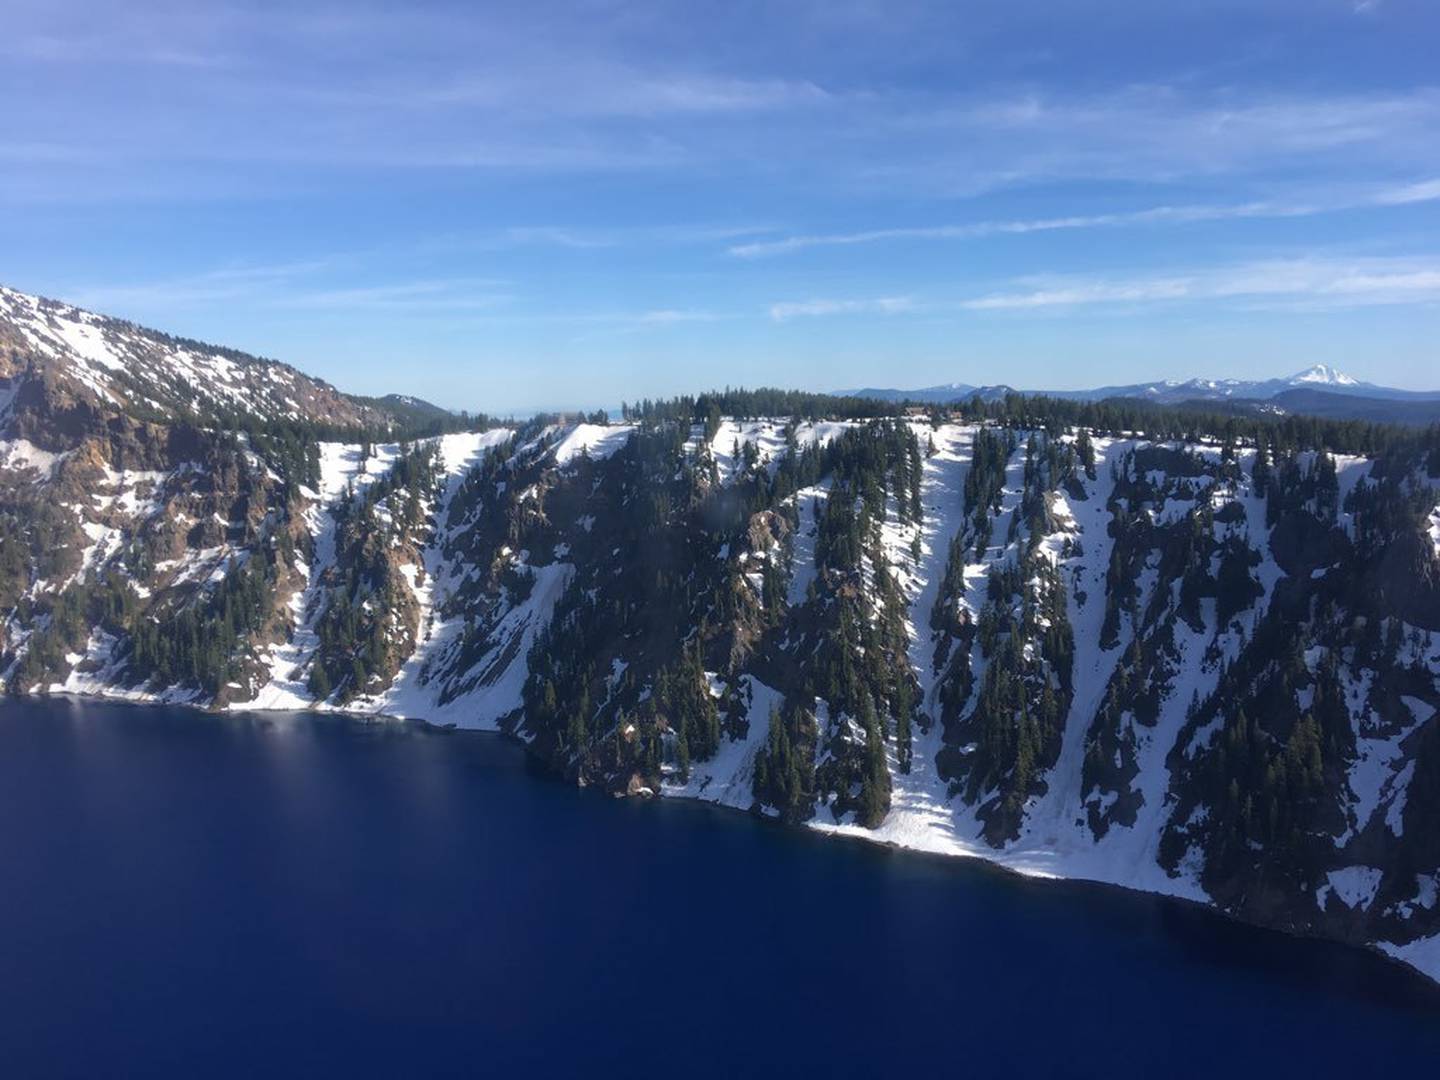 Aerial view of the caldera of Crater Lake National Park near Rim Village Crater Lake National Park, Ore., on June 10, 2019.